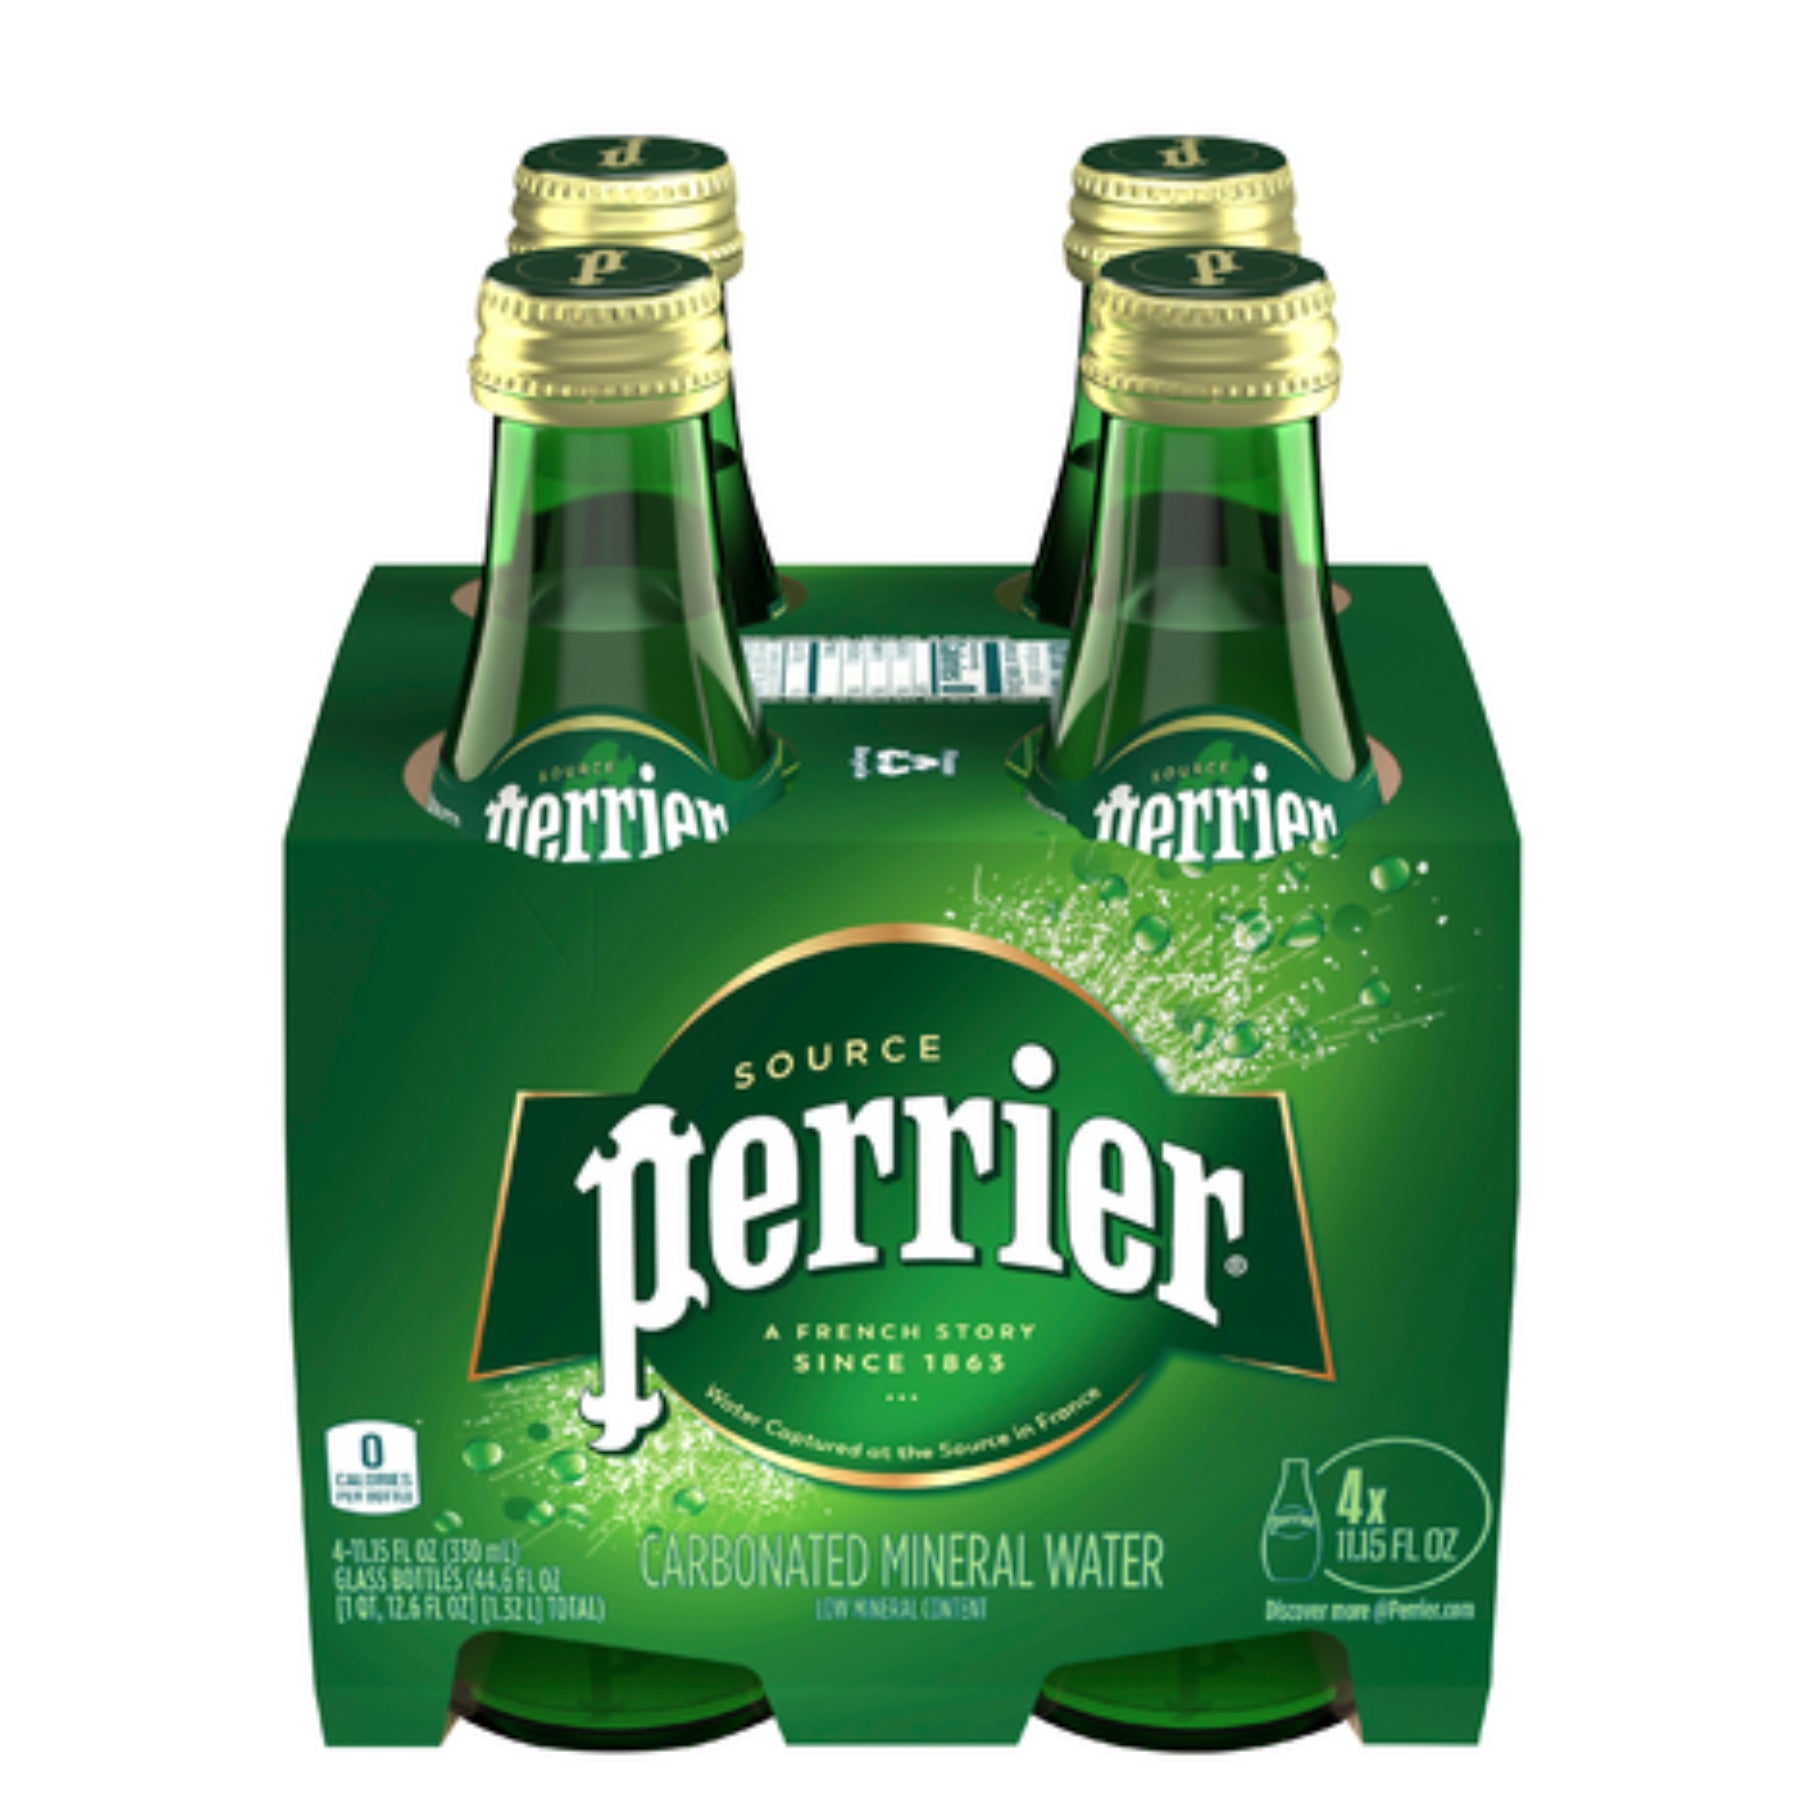 Buy Perrier Carbonated Sparkling Water 330ml, imported (Pack of 4 Bottle) 